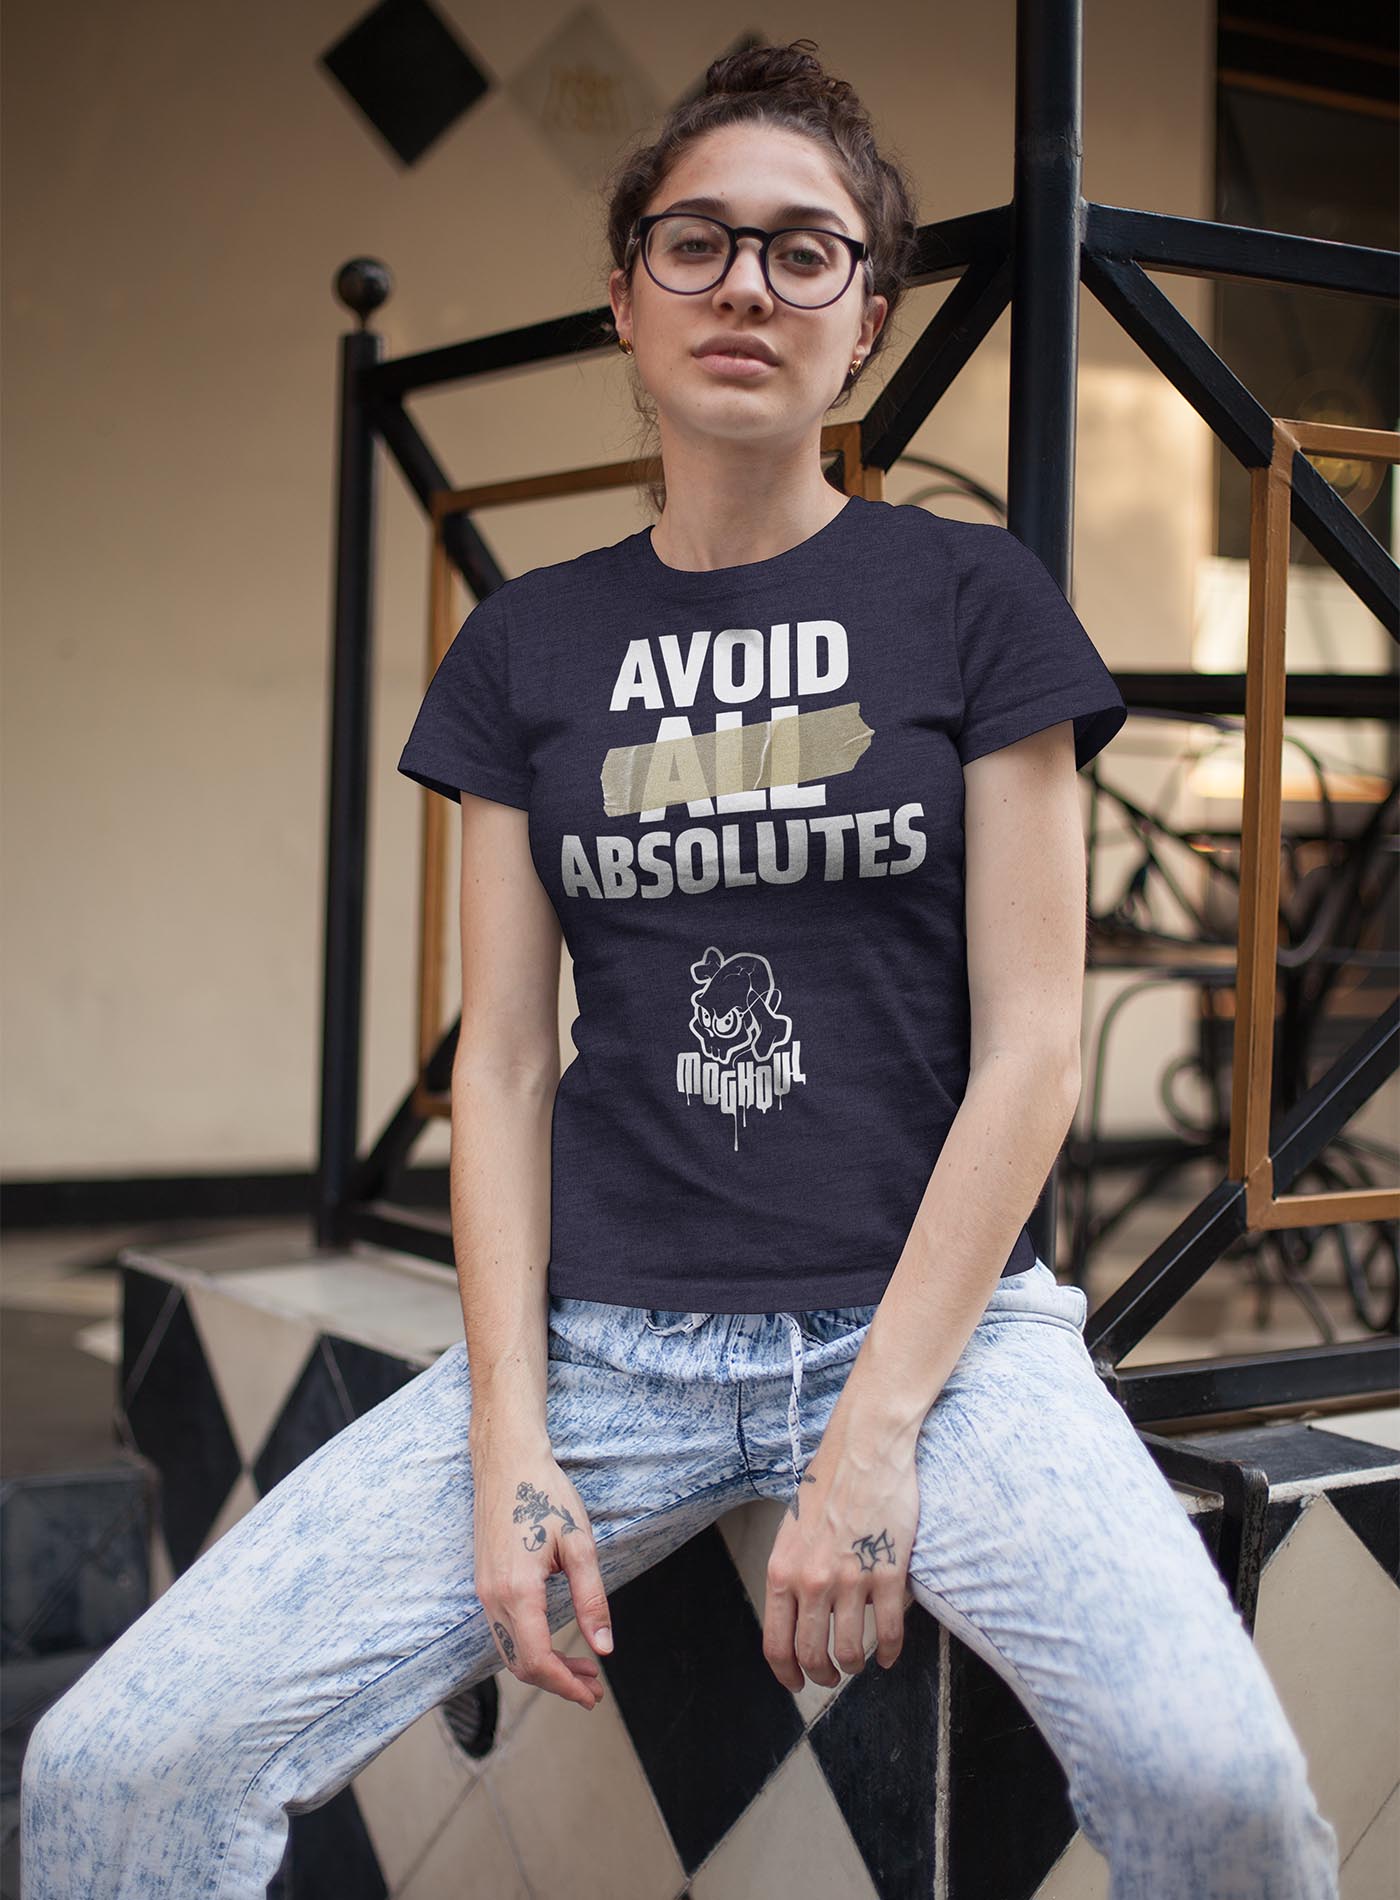 man modeling a heather black unisex t-shirt featuring the paradoxical phrase "avoid all absolutes" and the moghoul logo.